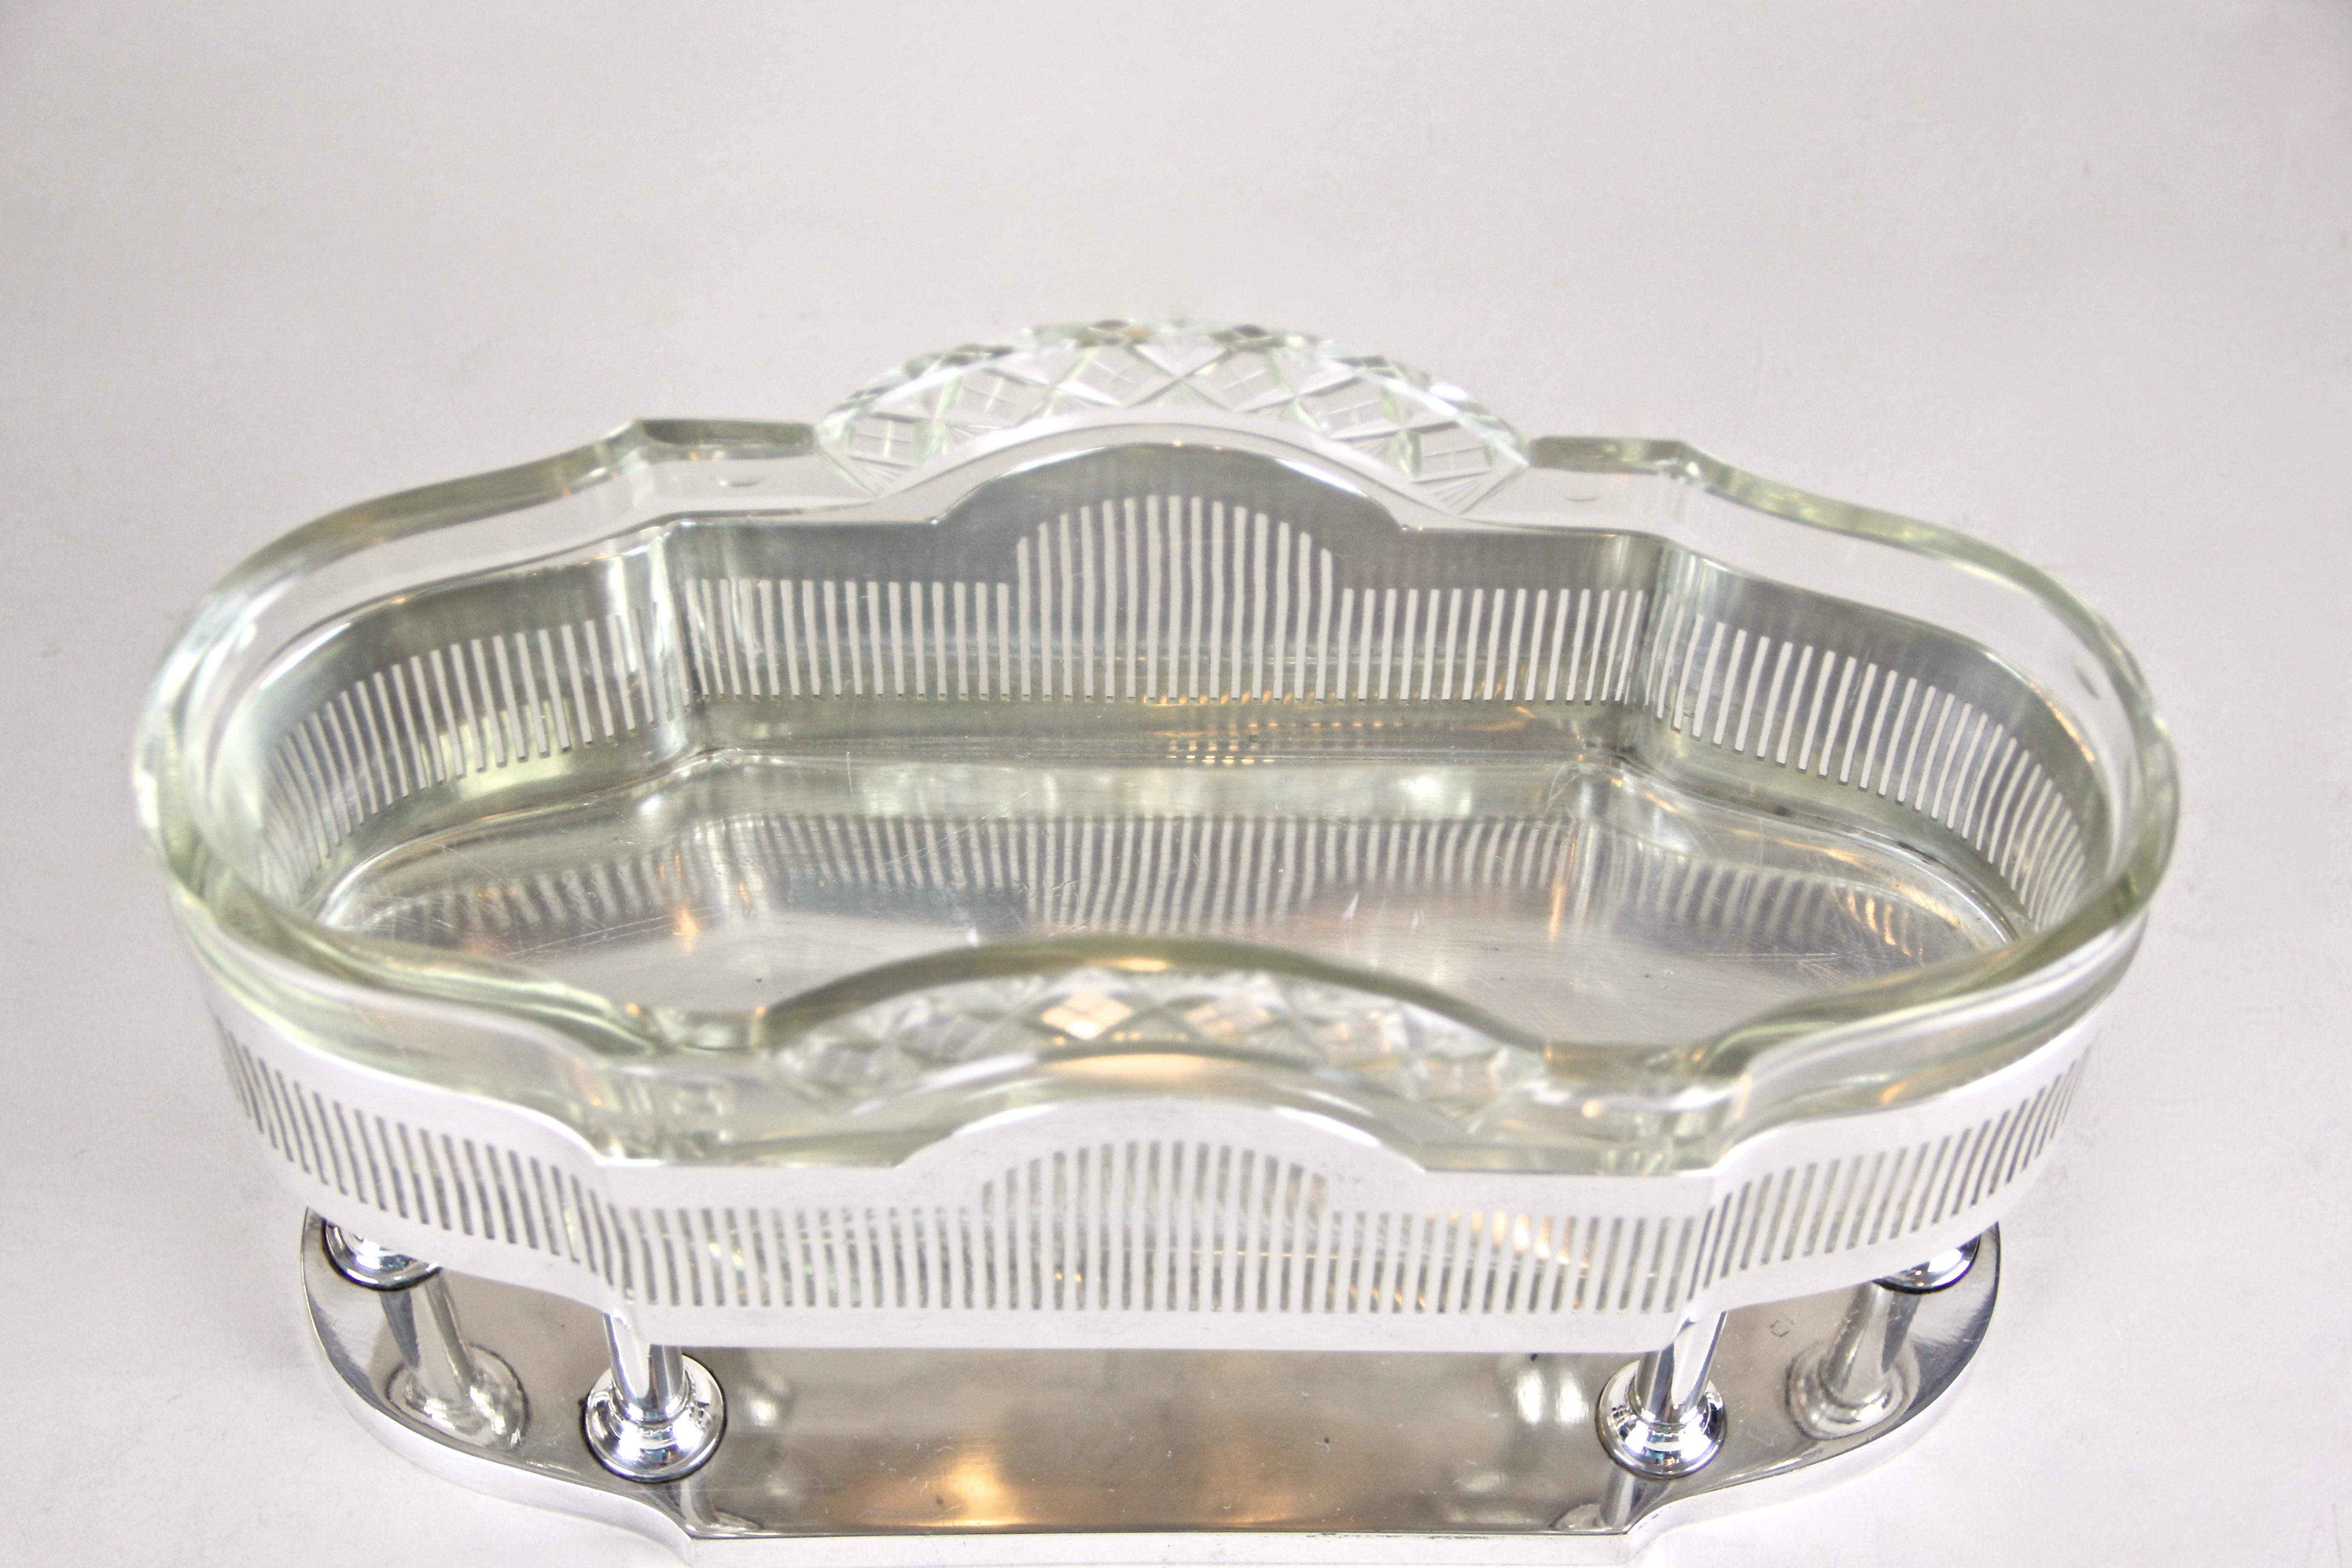 20th Century Silvered Jardinière with Cut-Glass Bowl by Argentor Wien, Austria, circa 1905